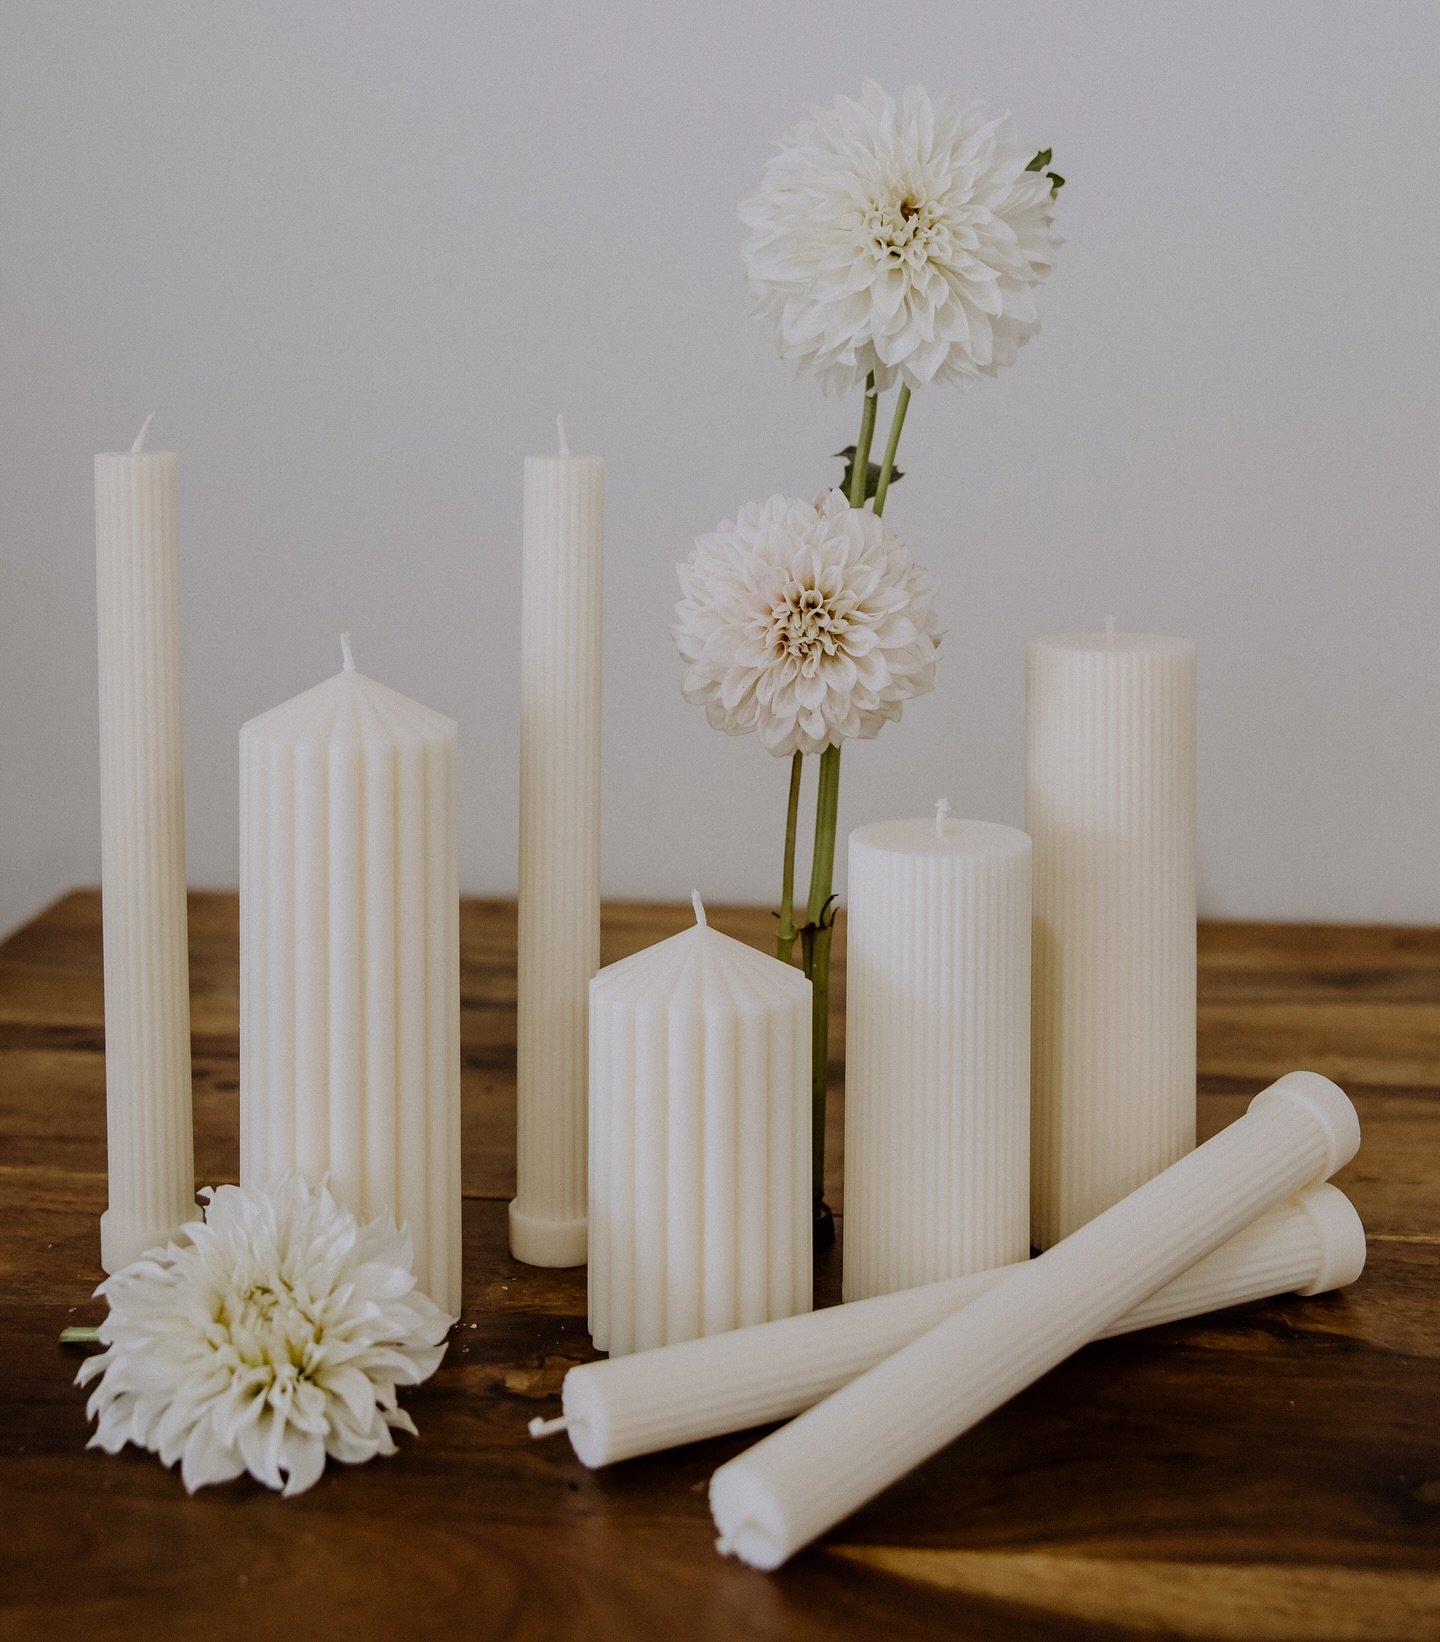 Soy wax beauty 😍 Elevate and impress at your next event with our gorgeous soy wax pillars 🤍 3 styles to choose from!